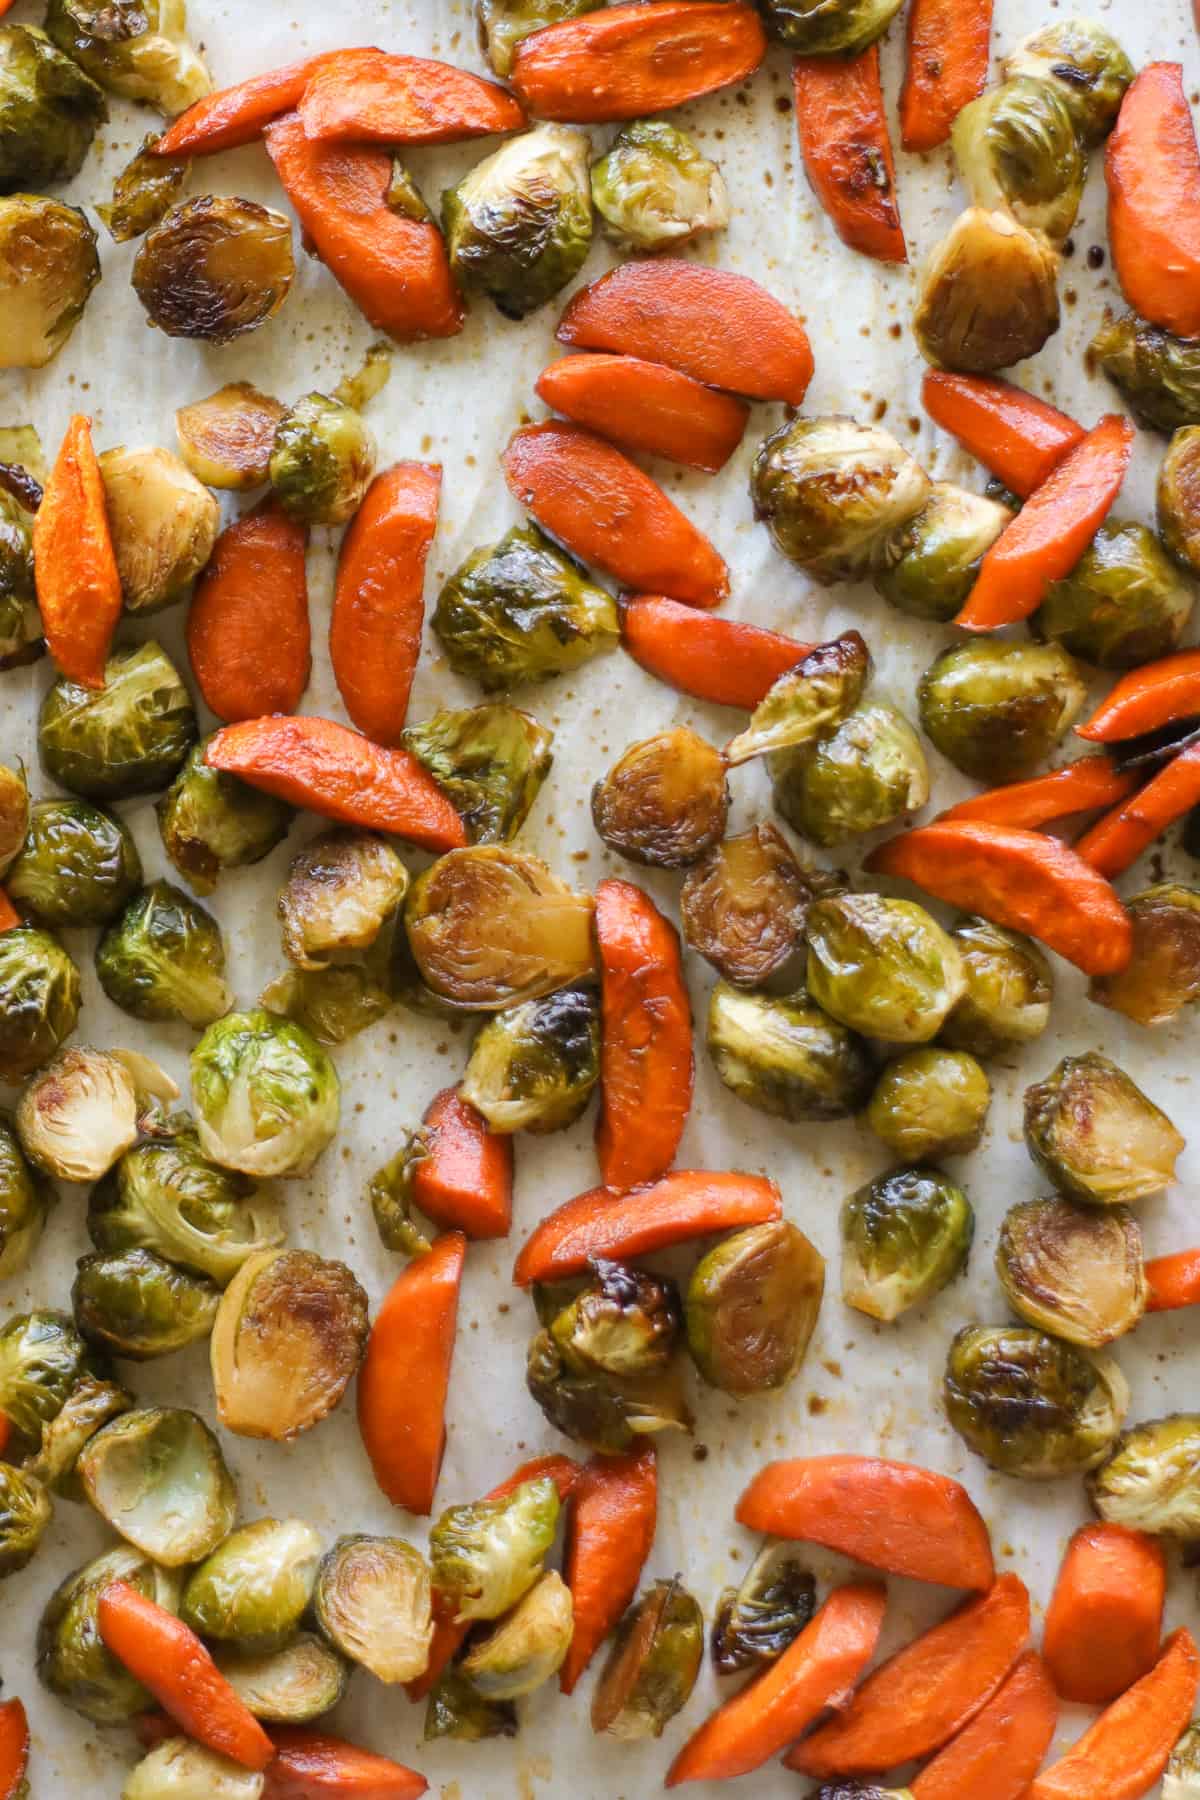 Roasted vegetables in a lined baking sheet.